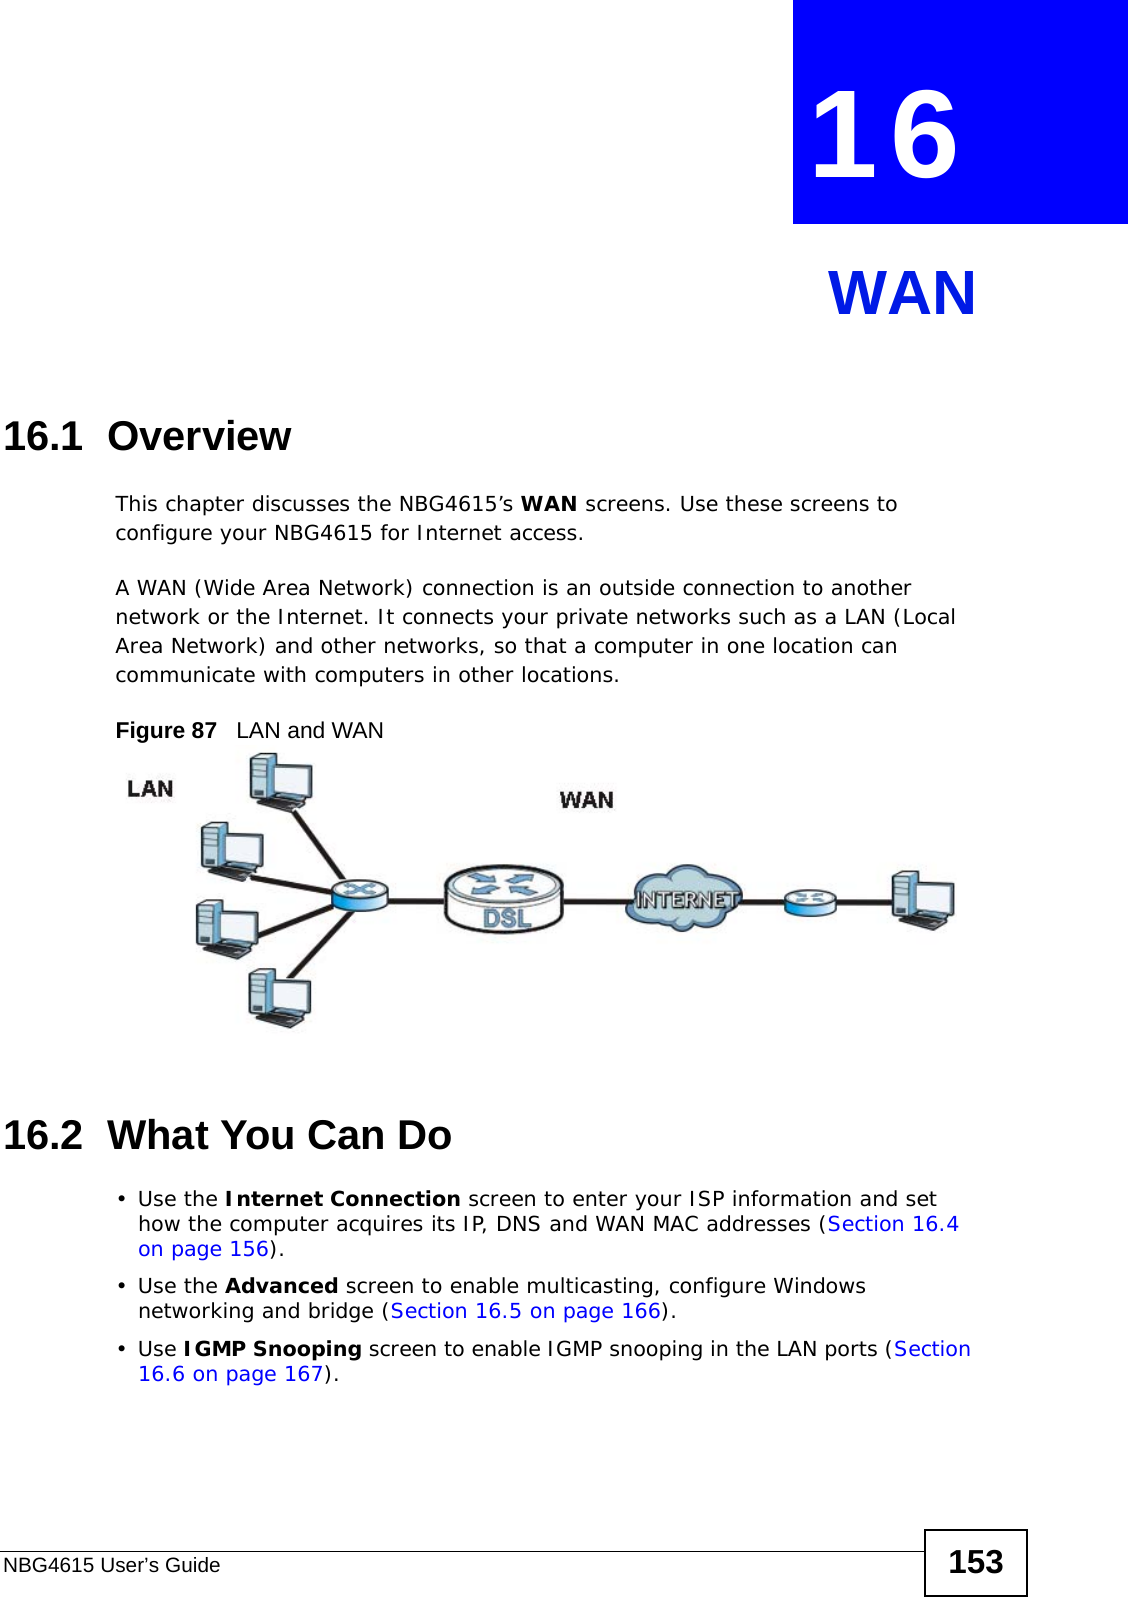 NBG4615 User’s Guide 153CHAPTER  16 WAN16.1  OverviewThis chapter discusses the NBG4615’s WAN screens. Use these screens to configure your NBG4615 for Internet access.A WAN (Wide Area Network) connection is an outside connection to another network or the Internet. It connects your private networks such as a LAN (Local Area Network) and other networks, so that a computer in one location can communicate with computers in other locations.Figure 87   LAN and WAN16.2  What You Can Do•Use the Internet Connection screen to enter your ISP information and set how the computer acquires its IP, DNS and WAN MAC addresses (Section 16.4 on page 156).•Use the Advanced screen to enable multicasting, configure Windows networking and bridge (Section 16.5 on page 166).•Use IGMP Snooping screen to enable IGMP snooping in the LAN ports (Section 16.6 on page 167).